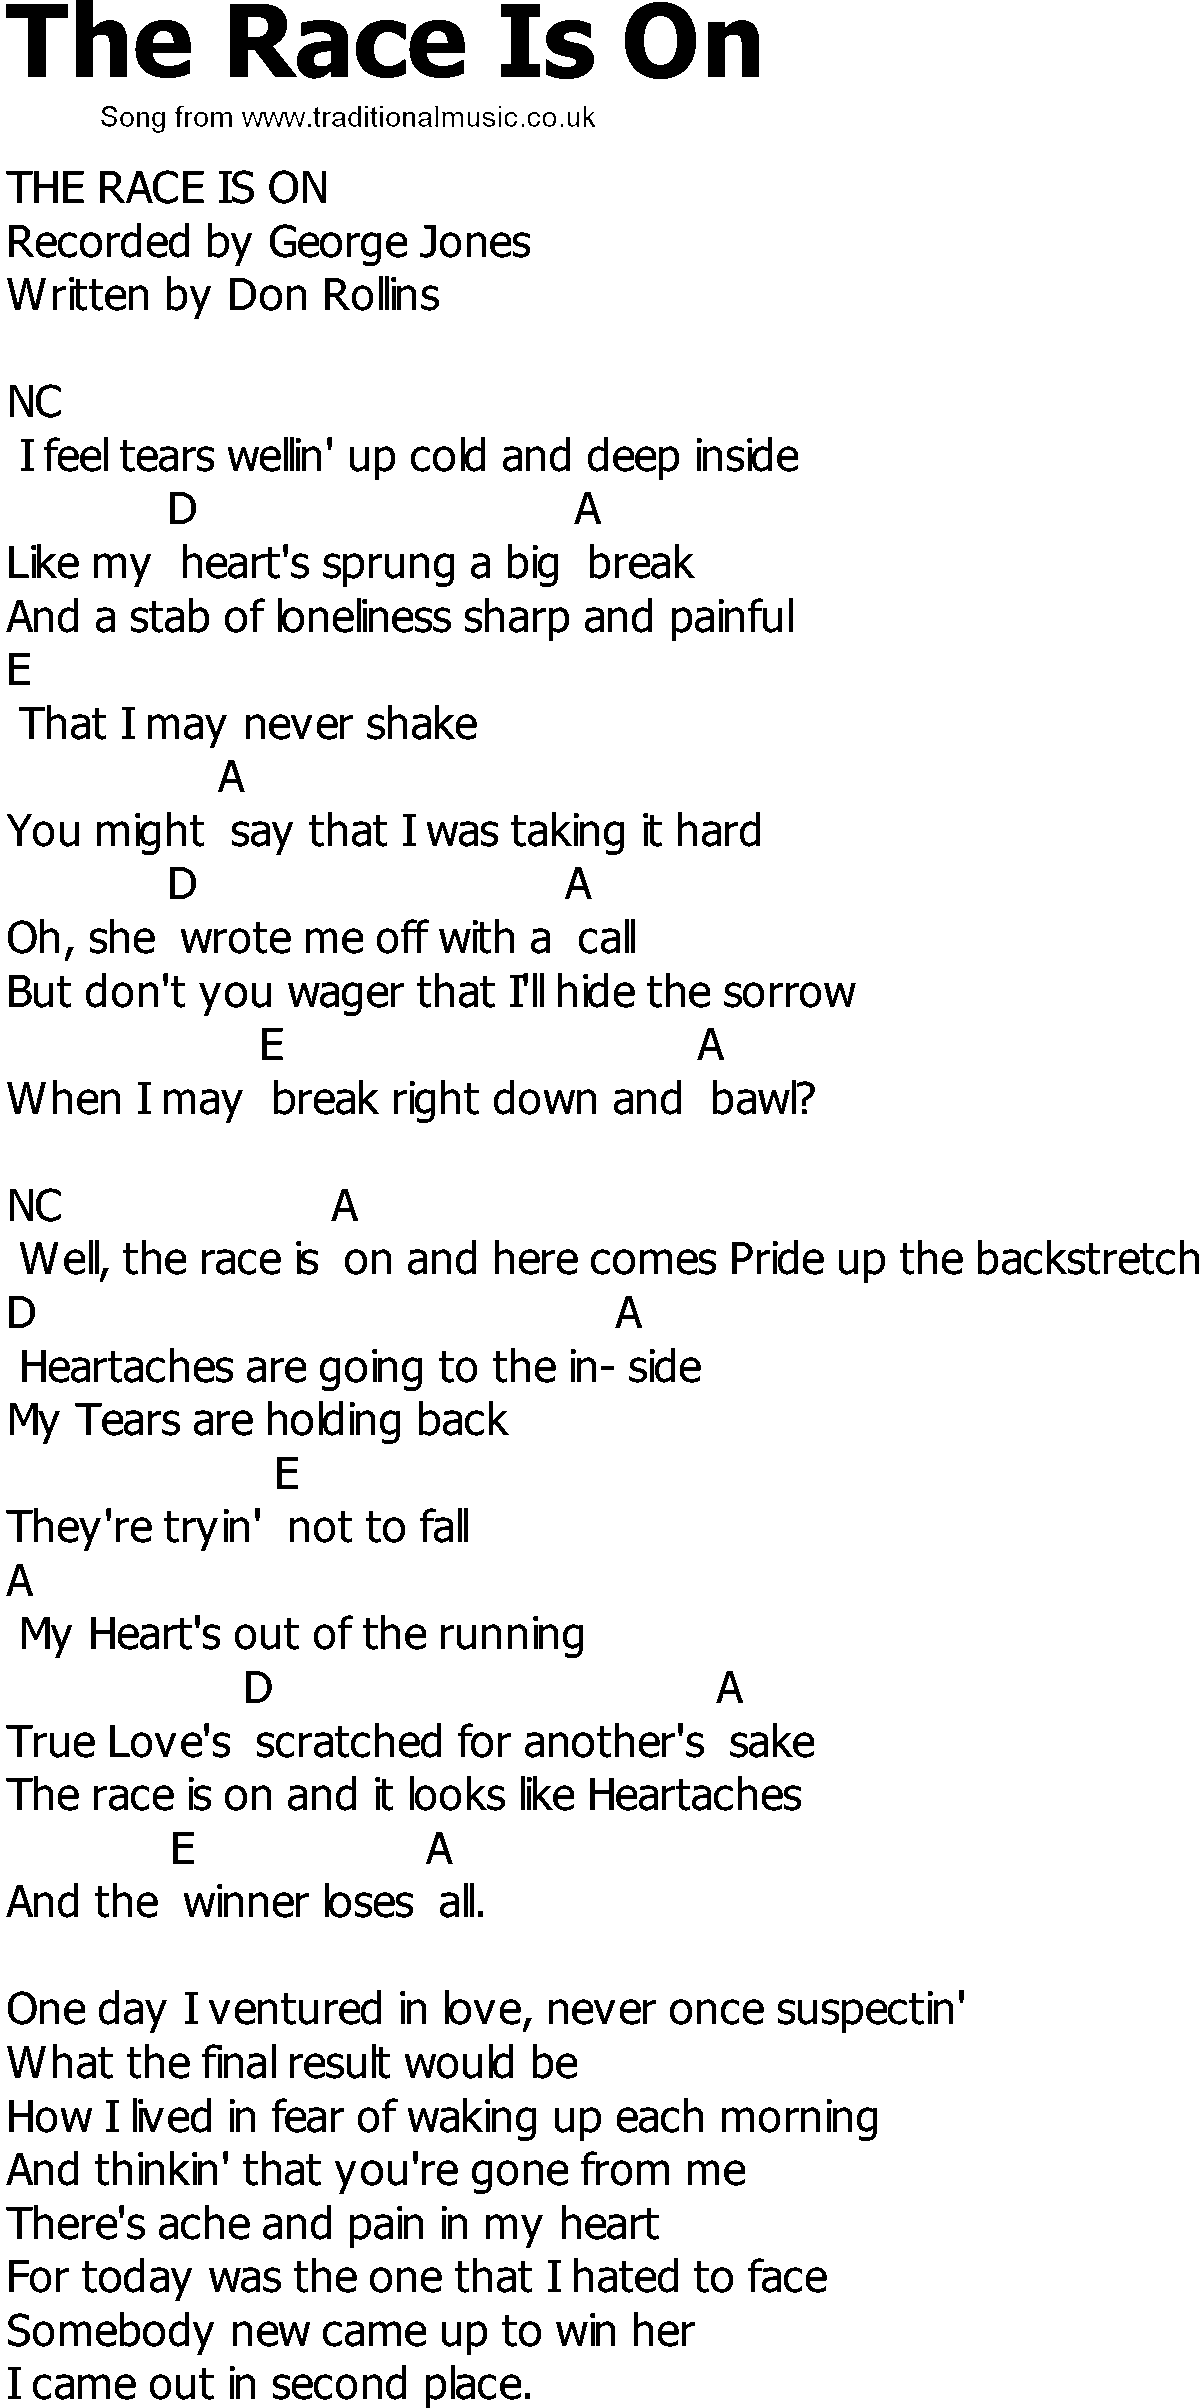 Old Country song lyrics with chords - The Race Is On